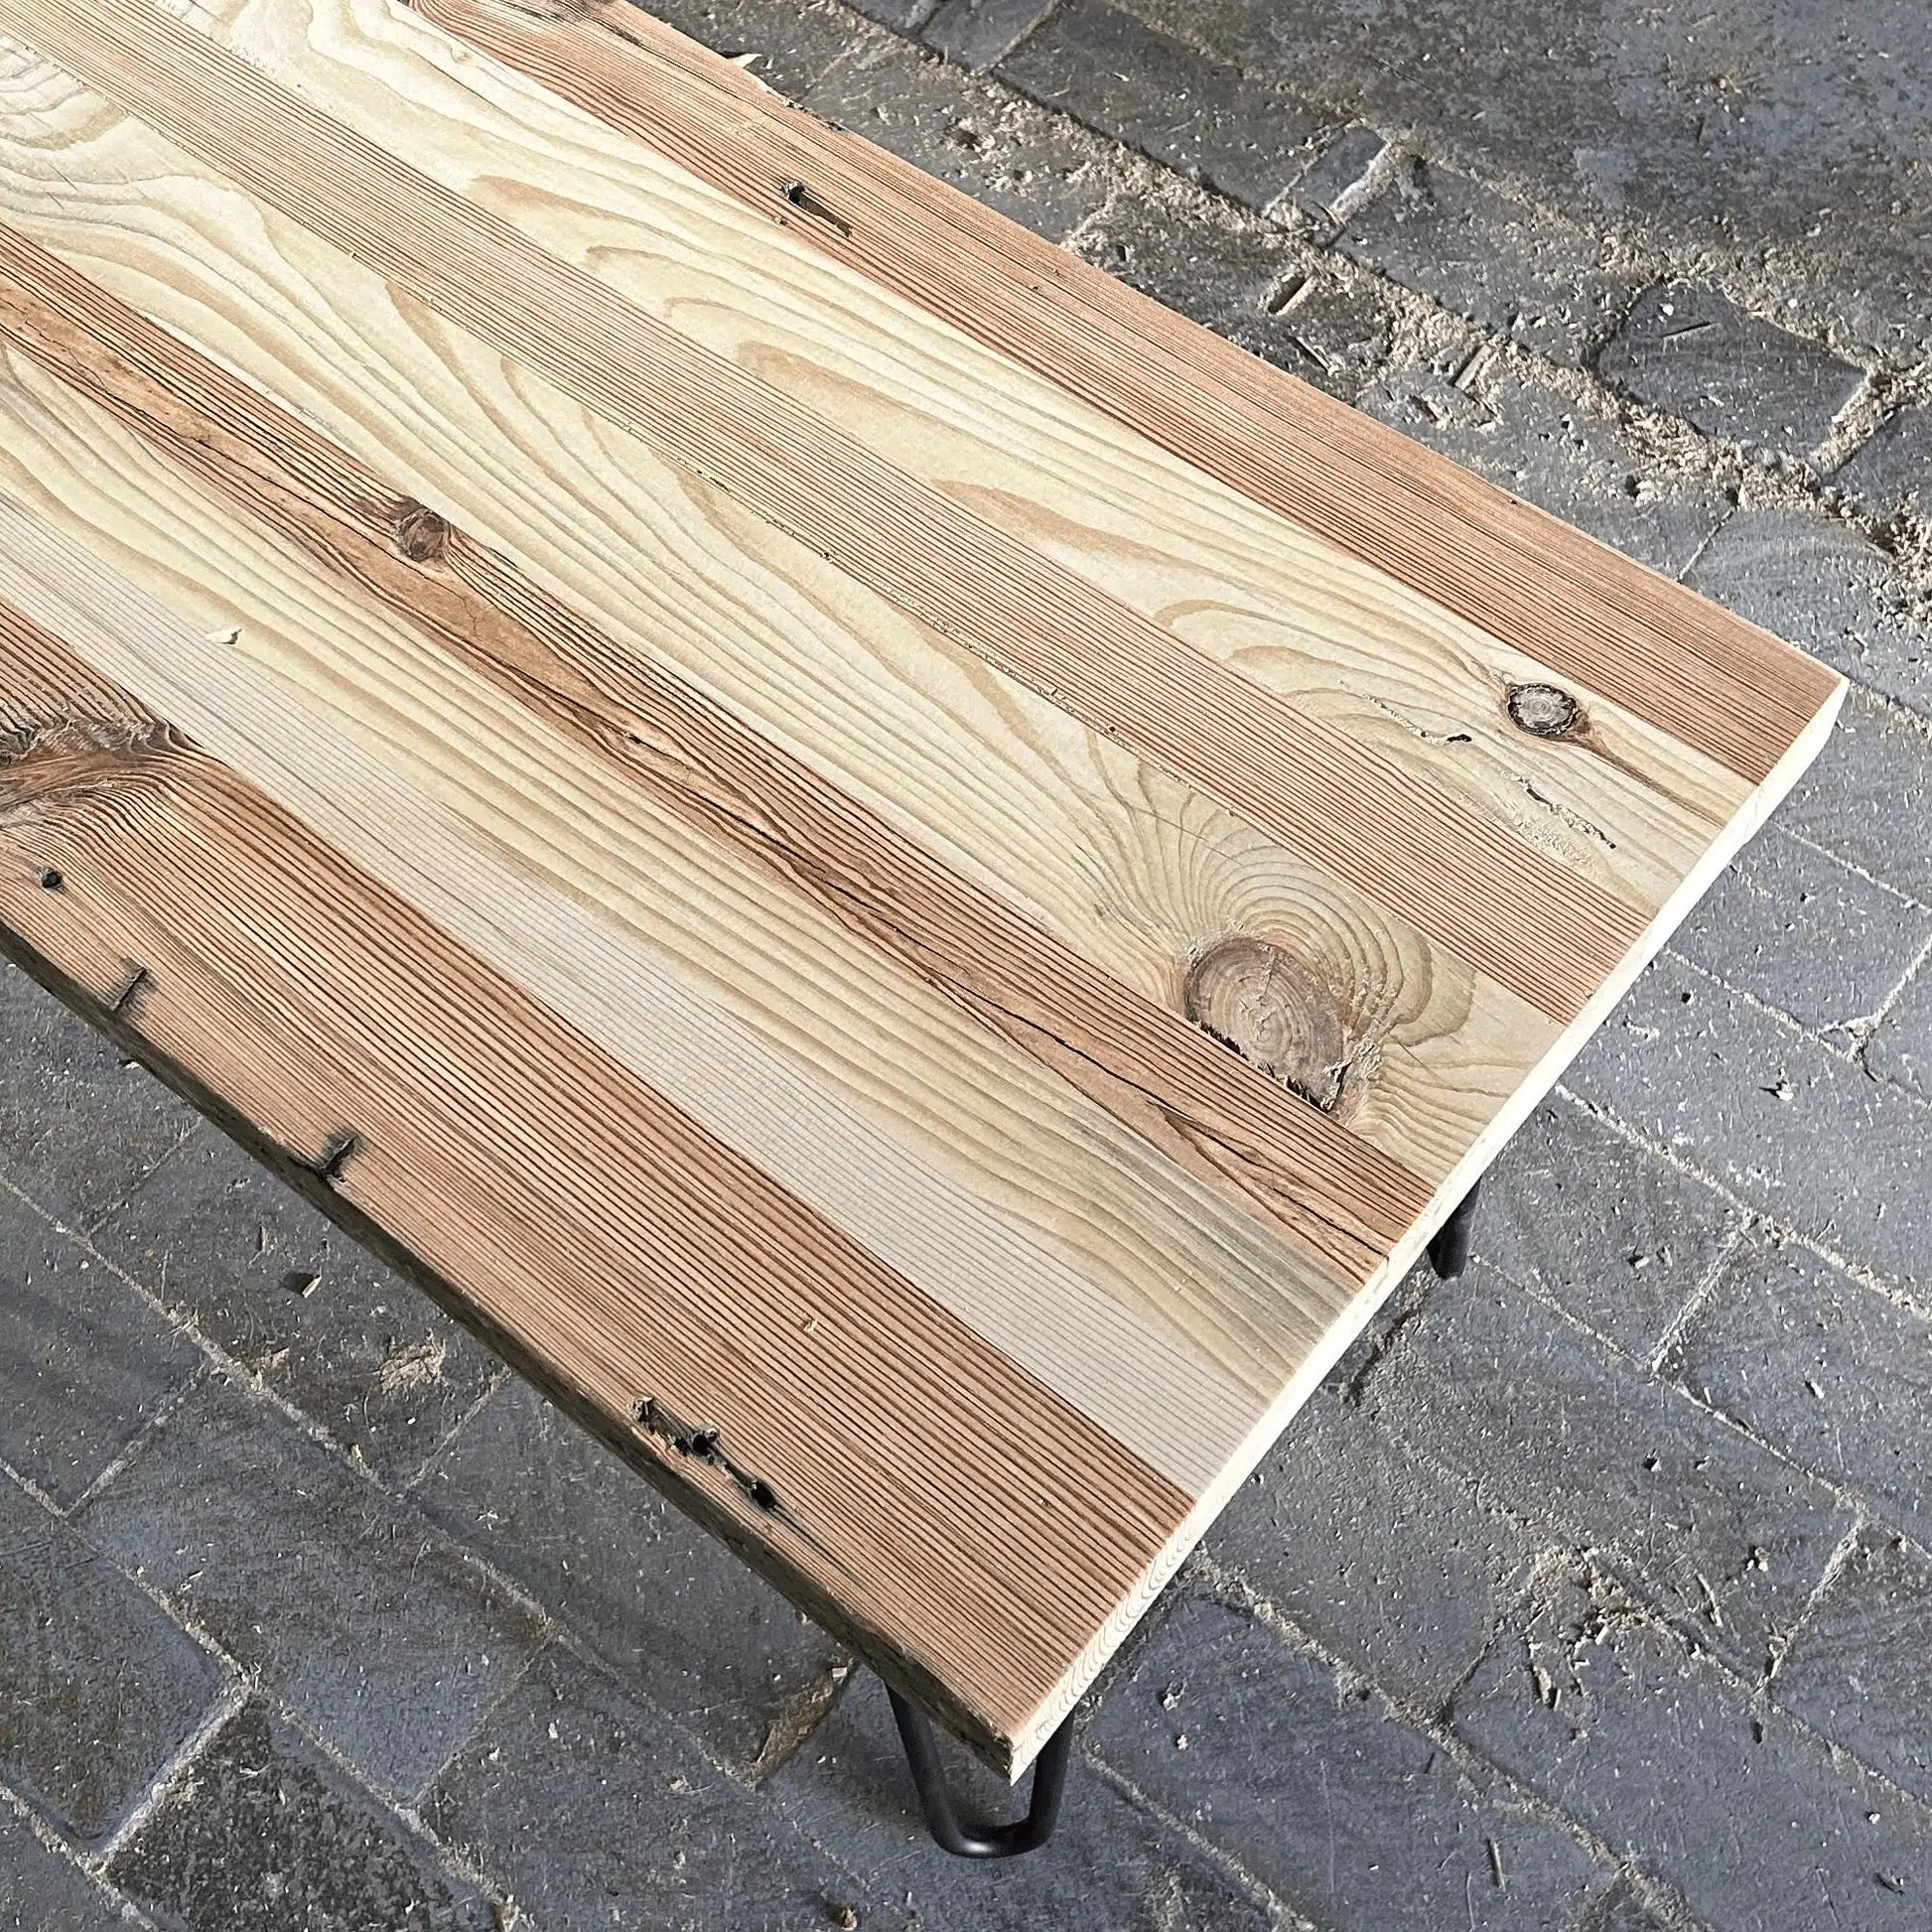 A reclaimed wood coffee table top shows variations in the wood and rustic characteristics. Table finish is unfinished or unfinished sealed.